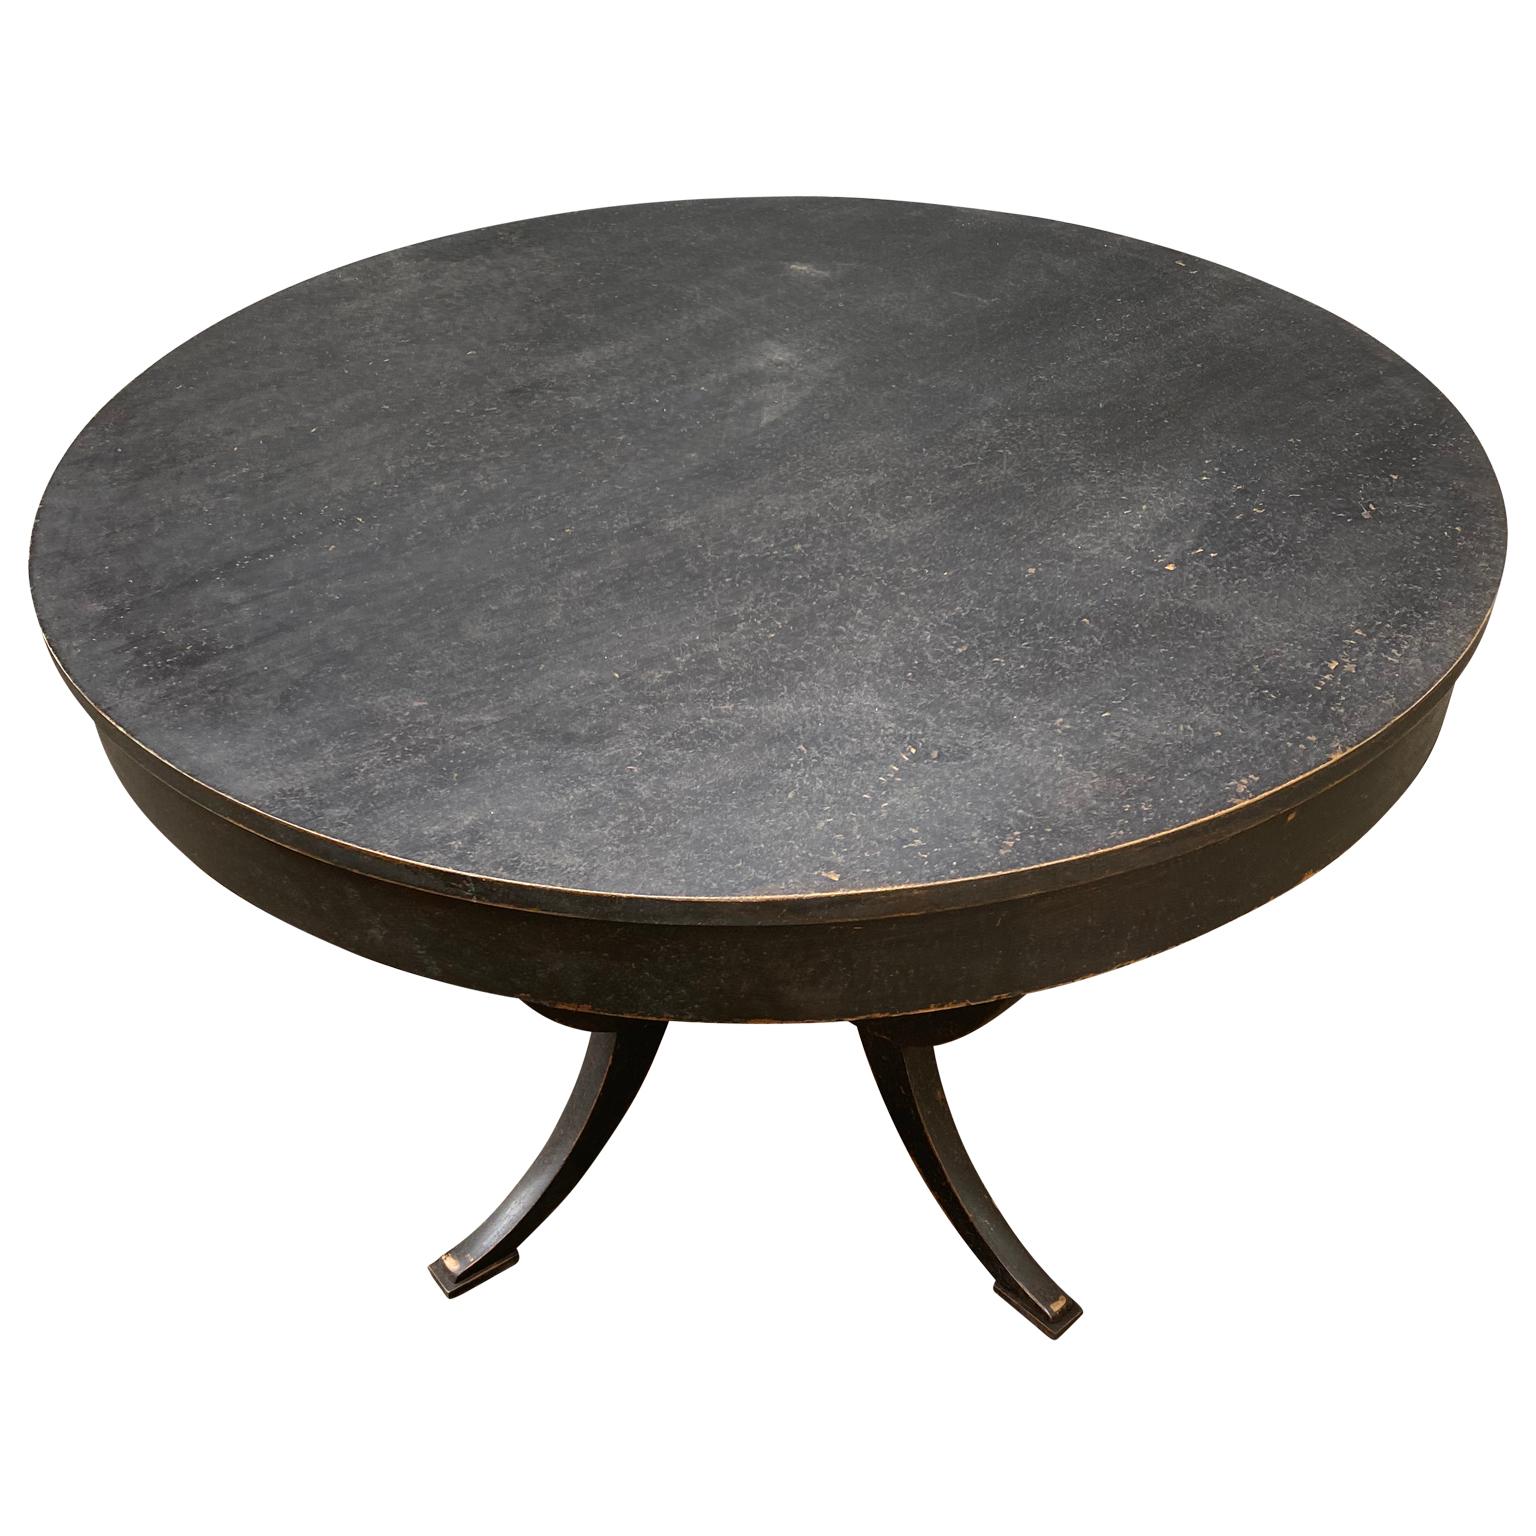 A Swedish black painted Biedermeier style oval table from circa 1920s-1930s.